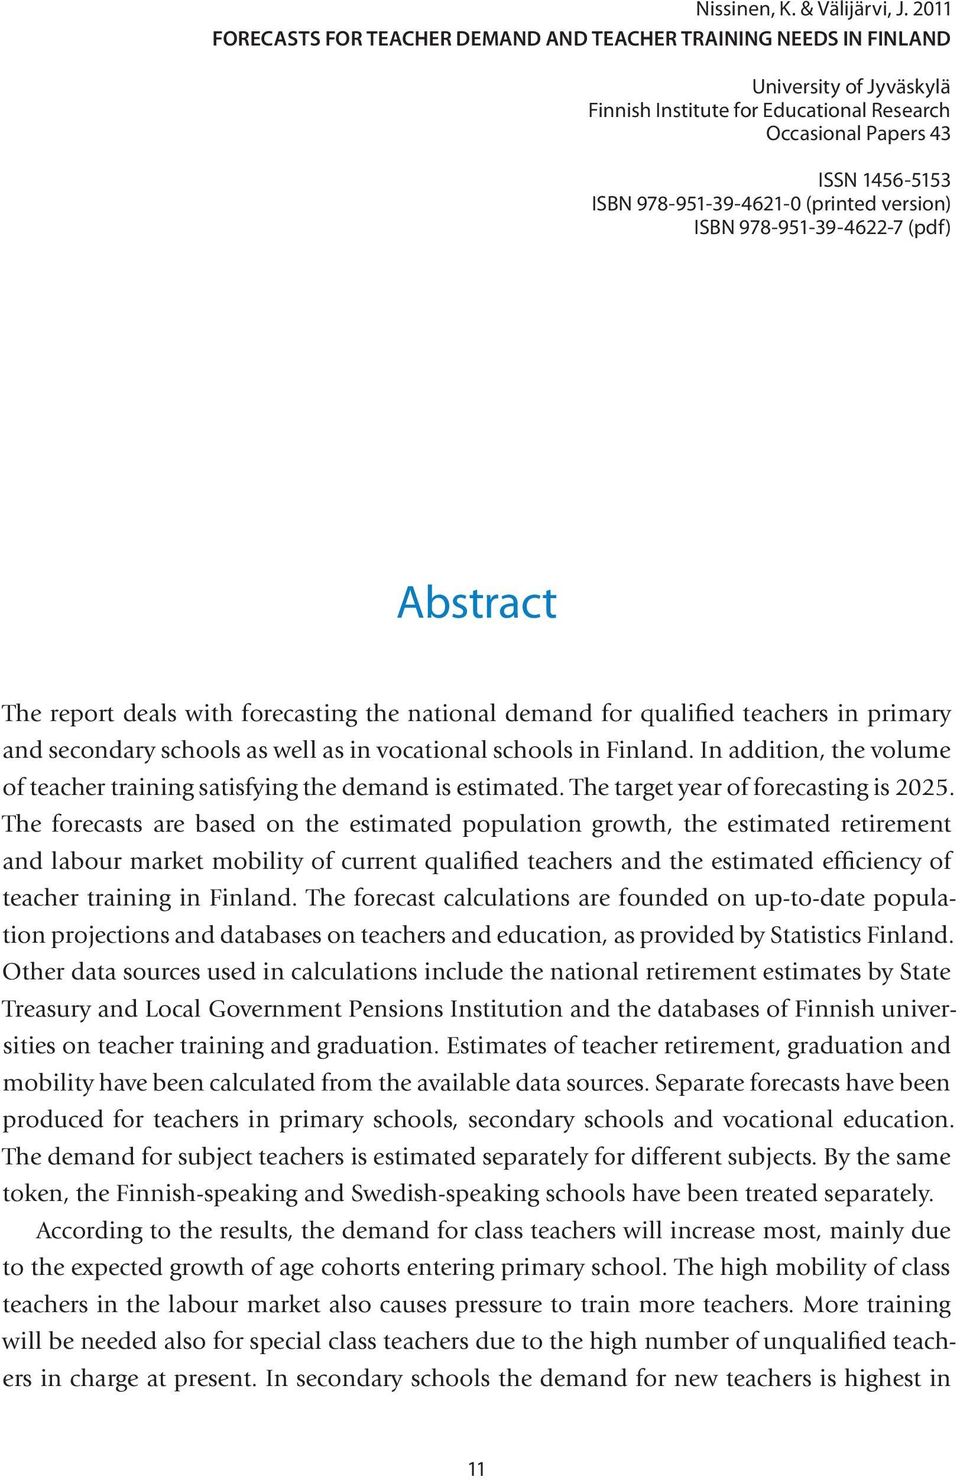 (printed version) ISBN 978-951-39-4622-7 (pdf) Abstract The report deals with forecasting the national demand for qualified teachers in primary and secondary schools as well as in vocational schools